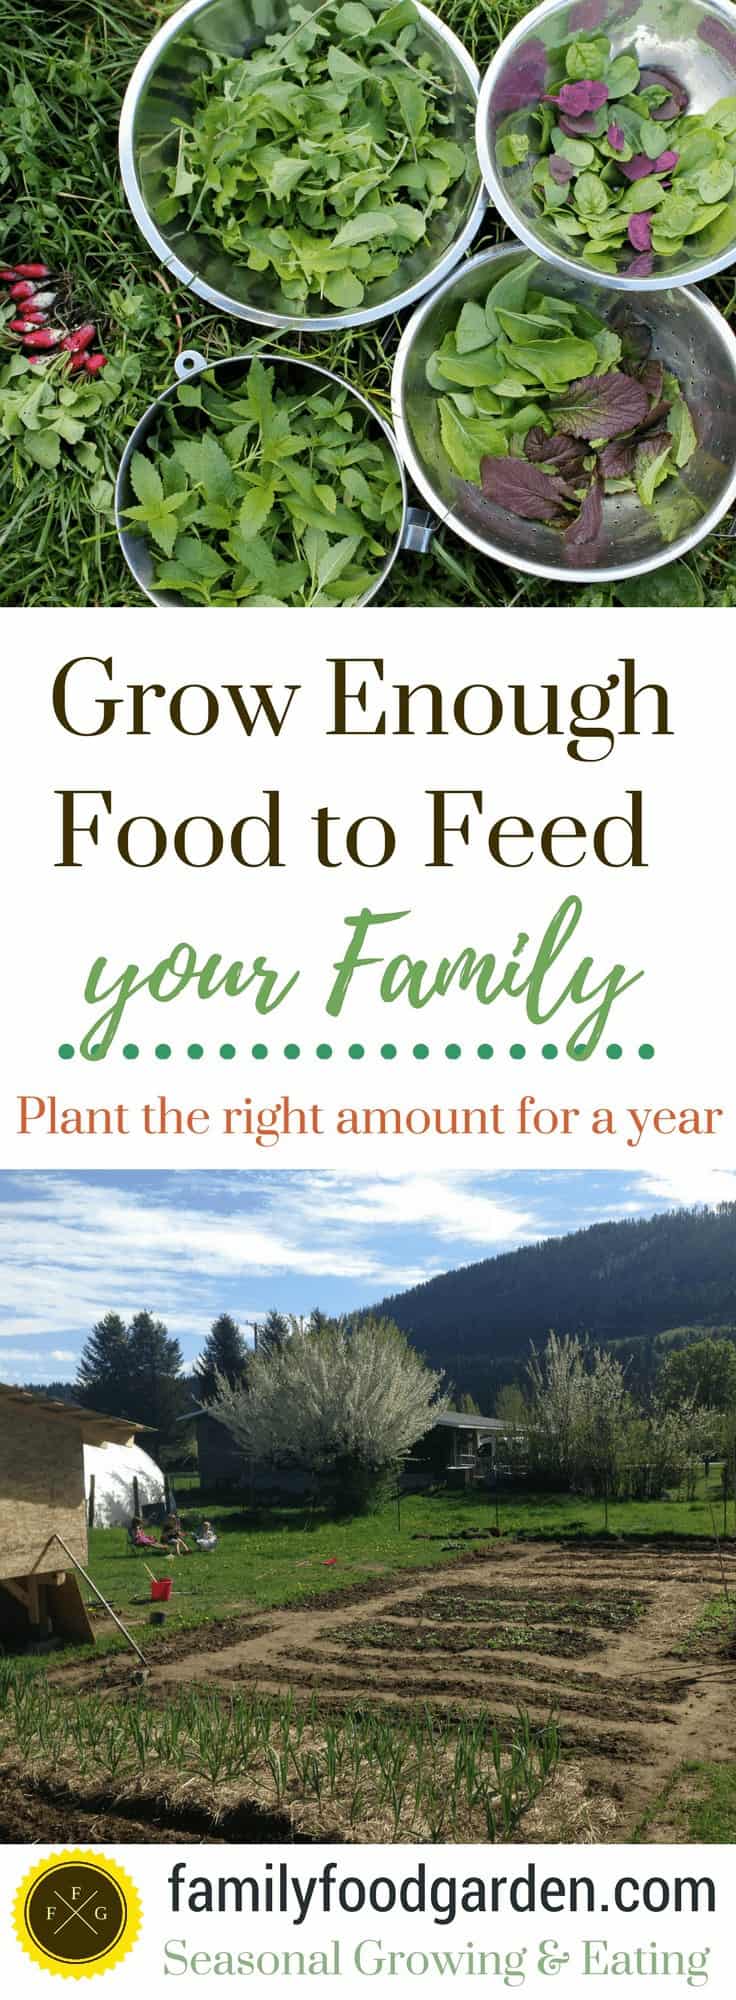 Grow Enough Food to Feed Your Family